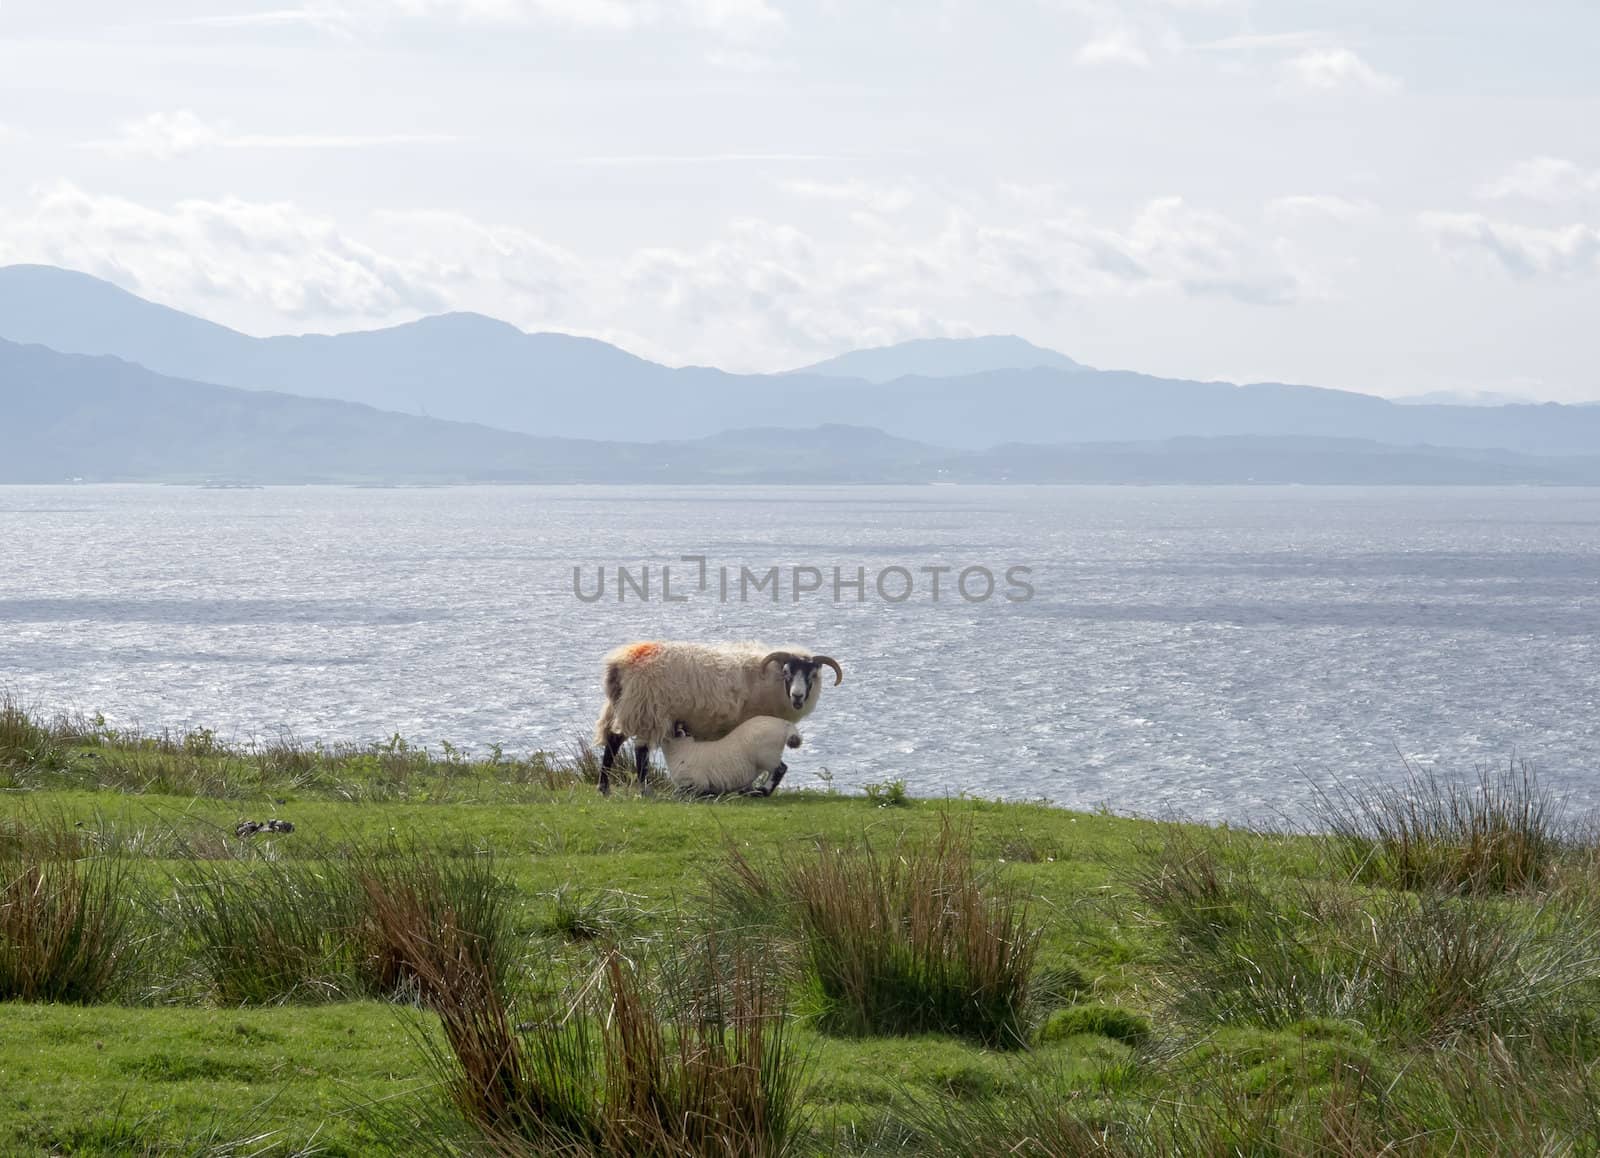 Ewe suckling lamb looking out over The Sound of Sleat from Skye towards mainland Scotland.